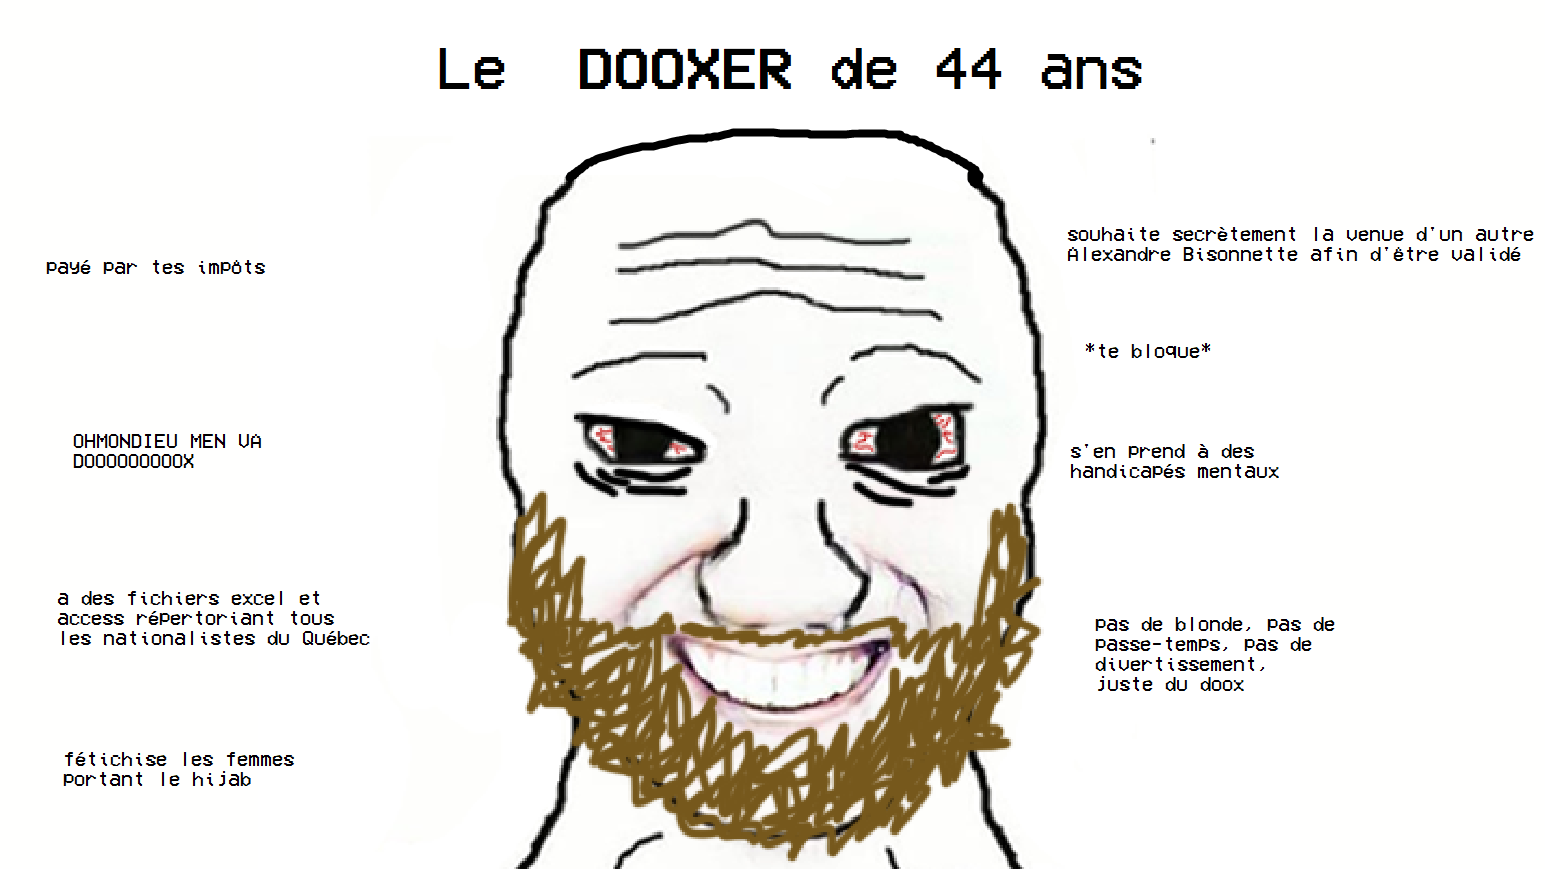 Meme titled (translated) 'The 44 year-old Dooxer', which shows a Coomer figure with text around him that reads 'paid by your taxes', 'OH MYGOD I'm DOOOXING' 'has excel sheets categorizing all of Québec's nationalists'. 'fetishizes women in hijabs', 'wishes for another Alexandre Bissonnette to be validated', 'blocks you' 'attacks peope with intellectual handicaps', and 'no girlfriend, no hobbes, no entertainement, just doox'. 